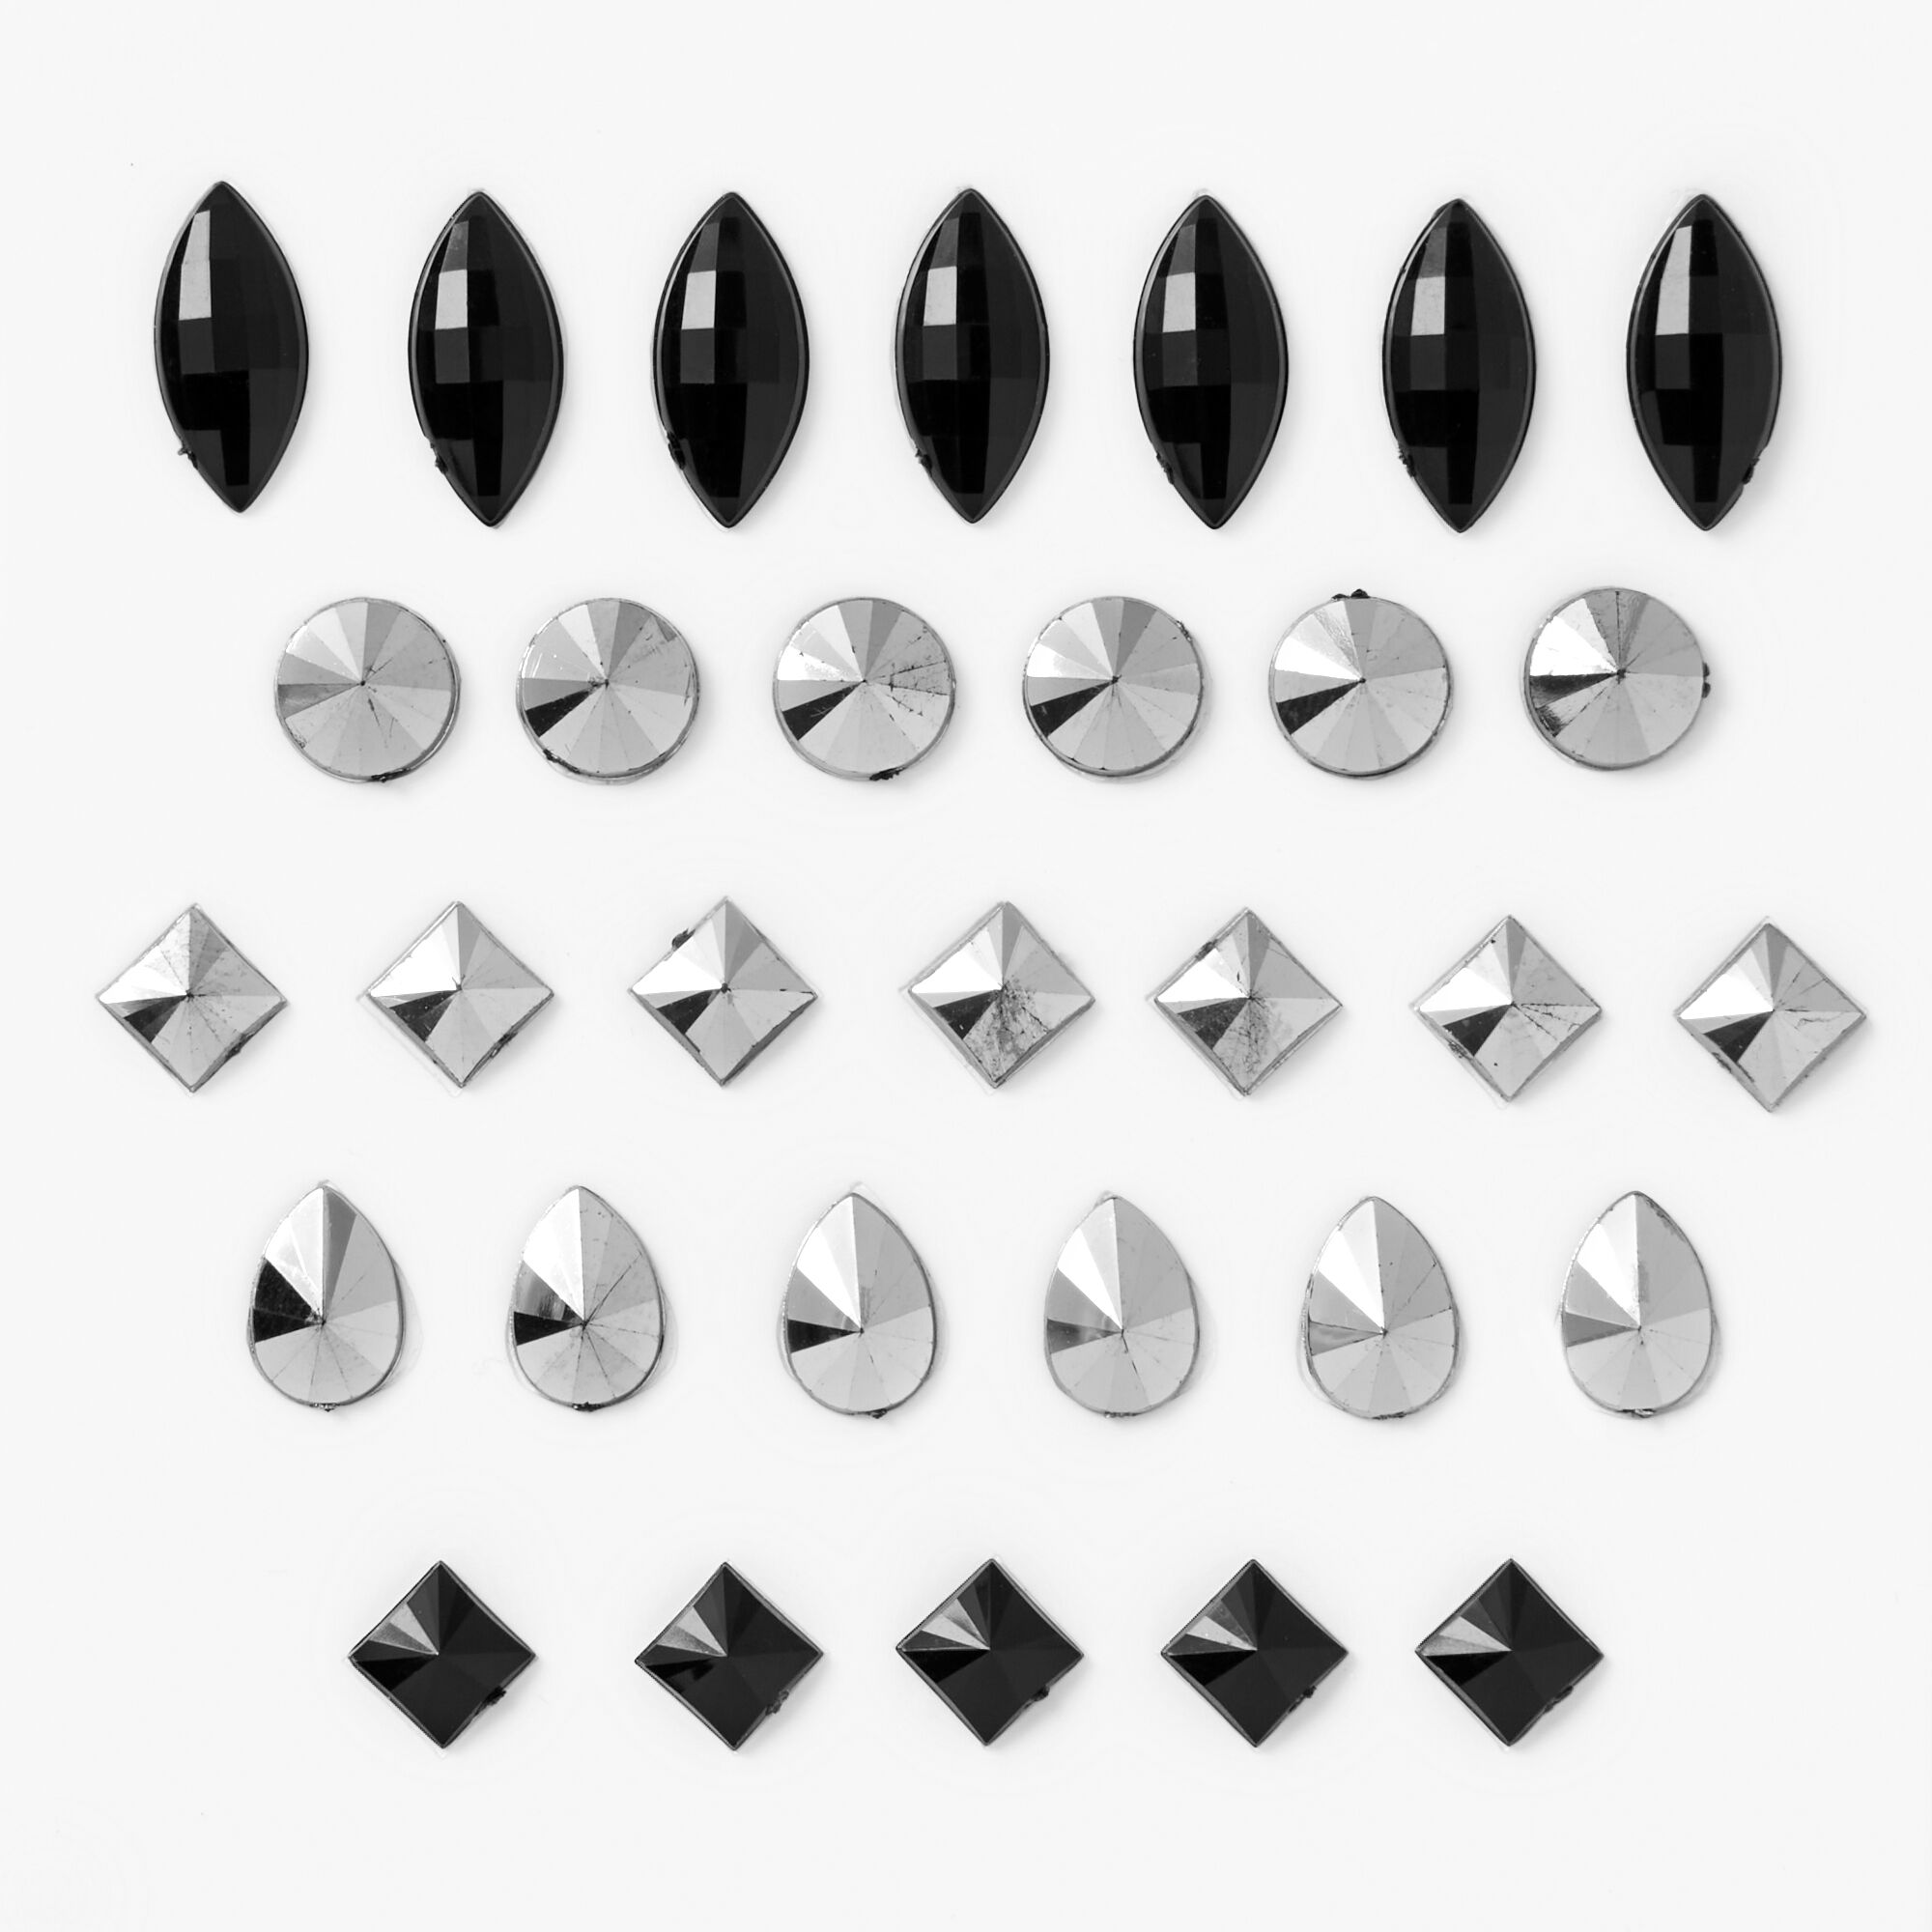 View Claires Silver Edgy Geometric Skin Gems 31 Pack Black information